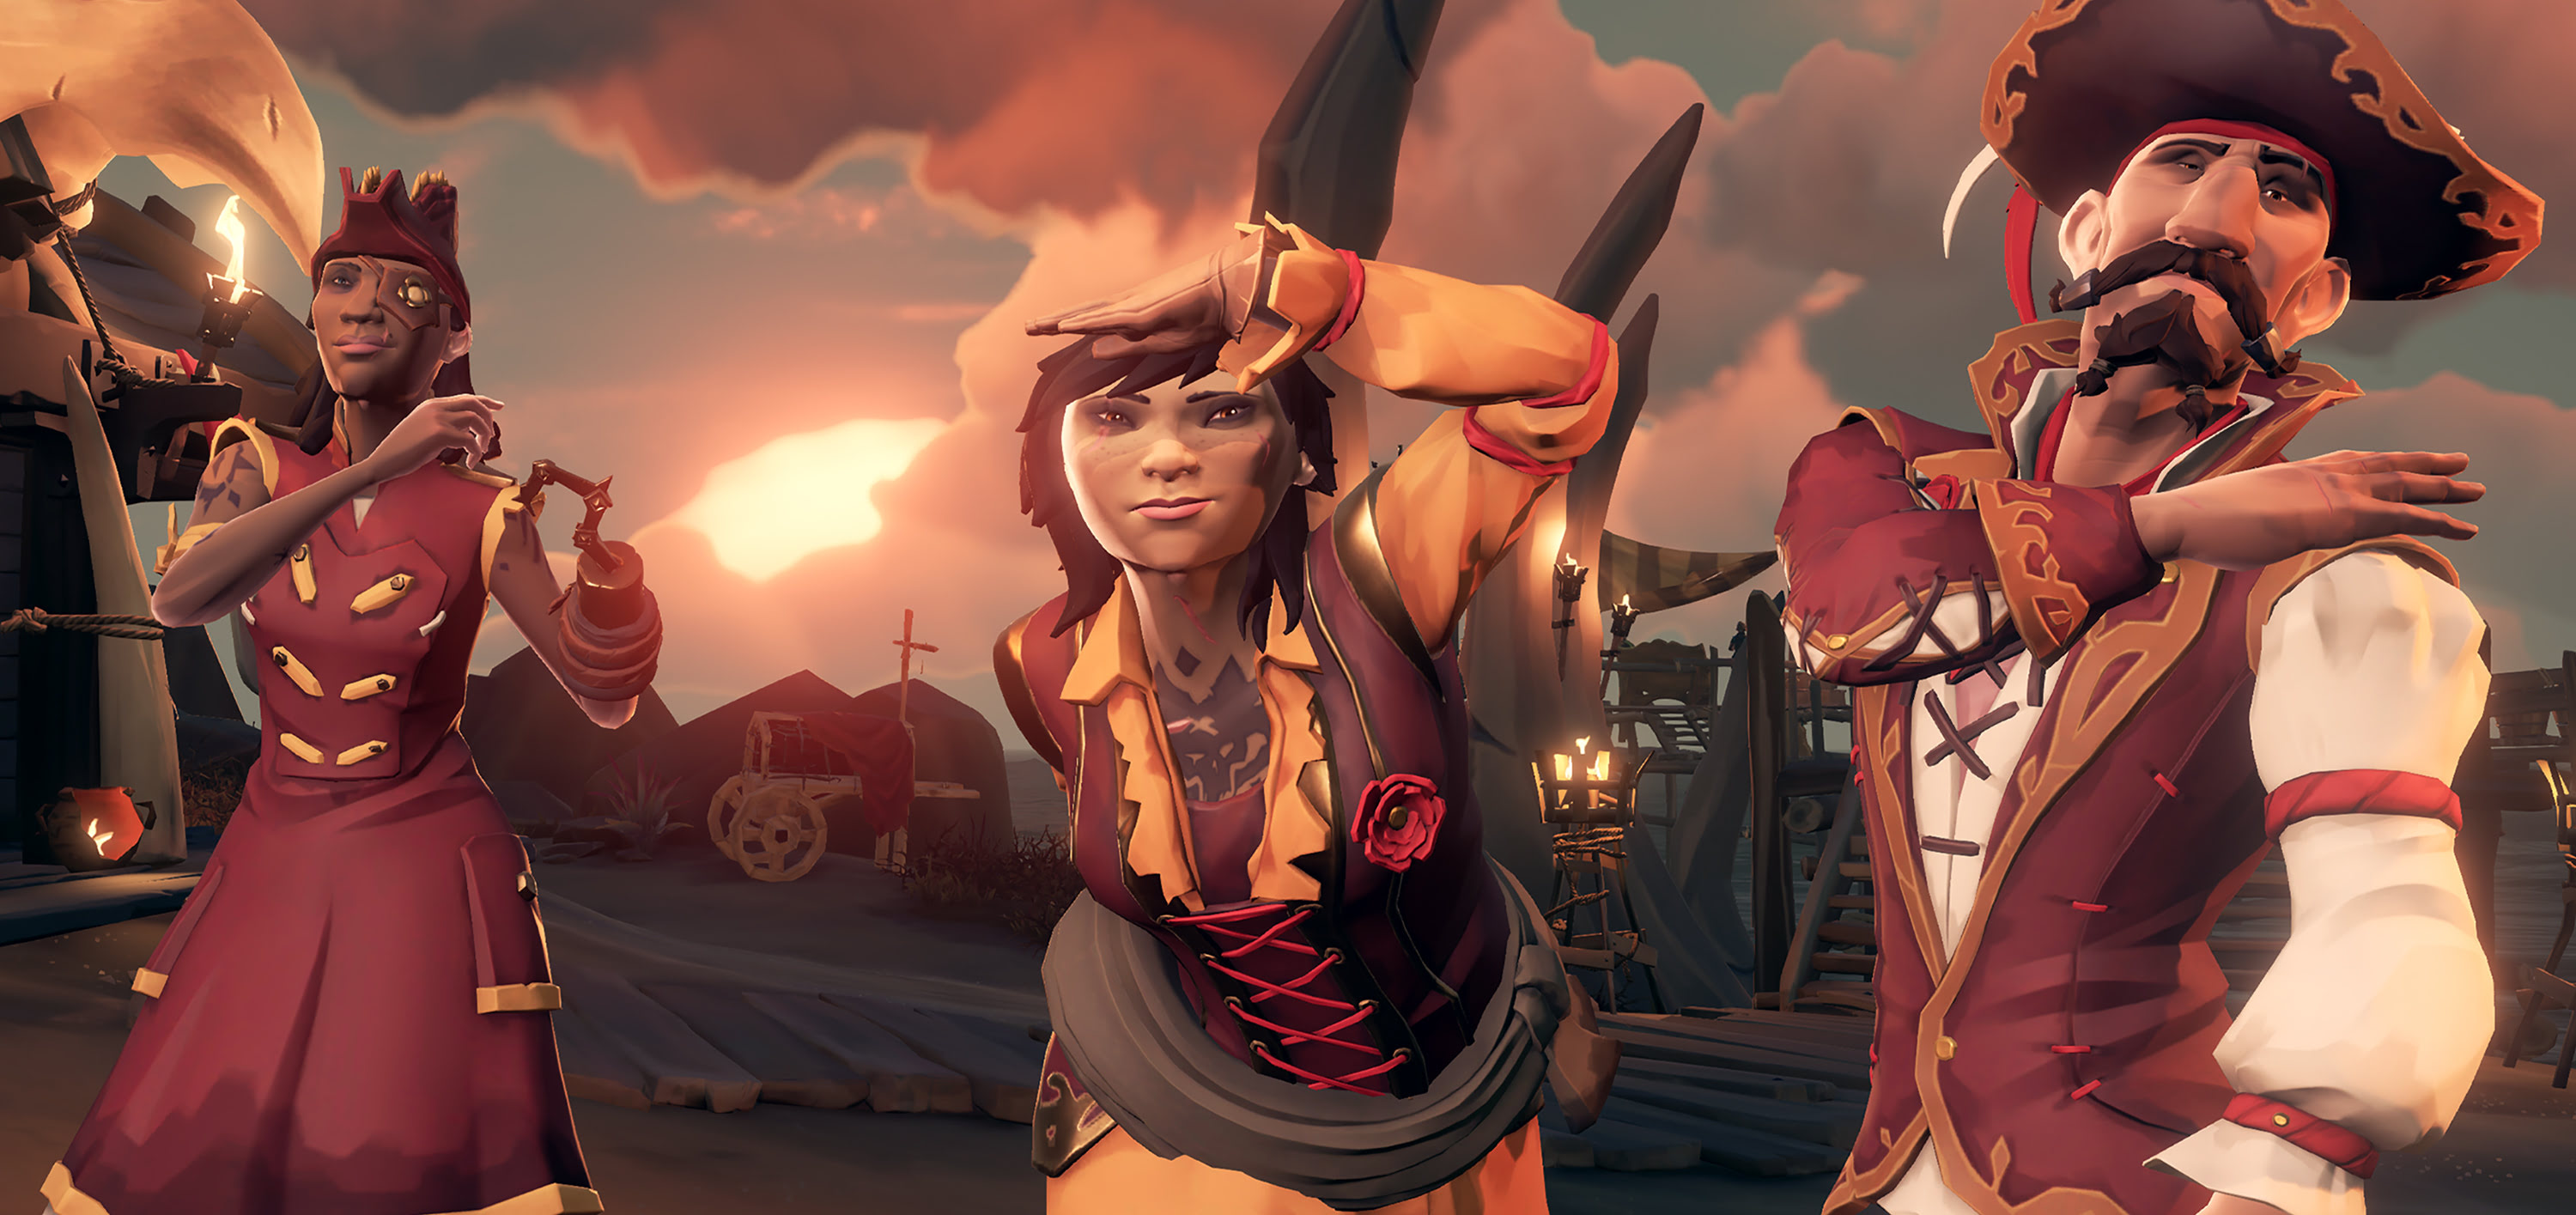 Sea Of Thieves Welcome To Sea Of Thieves On Xbox One Windows 10 And Steam